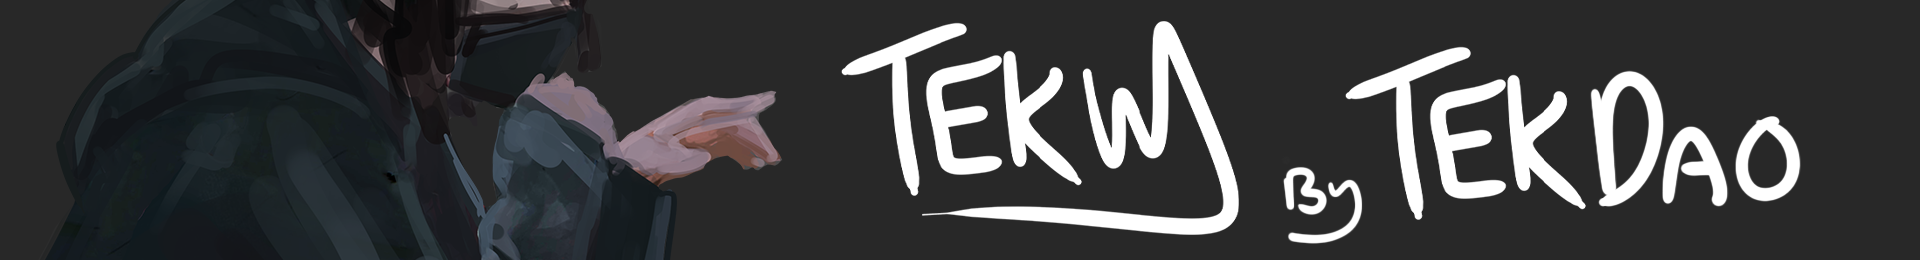 tekw by tekDAO banner